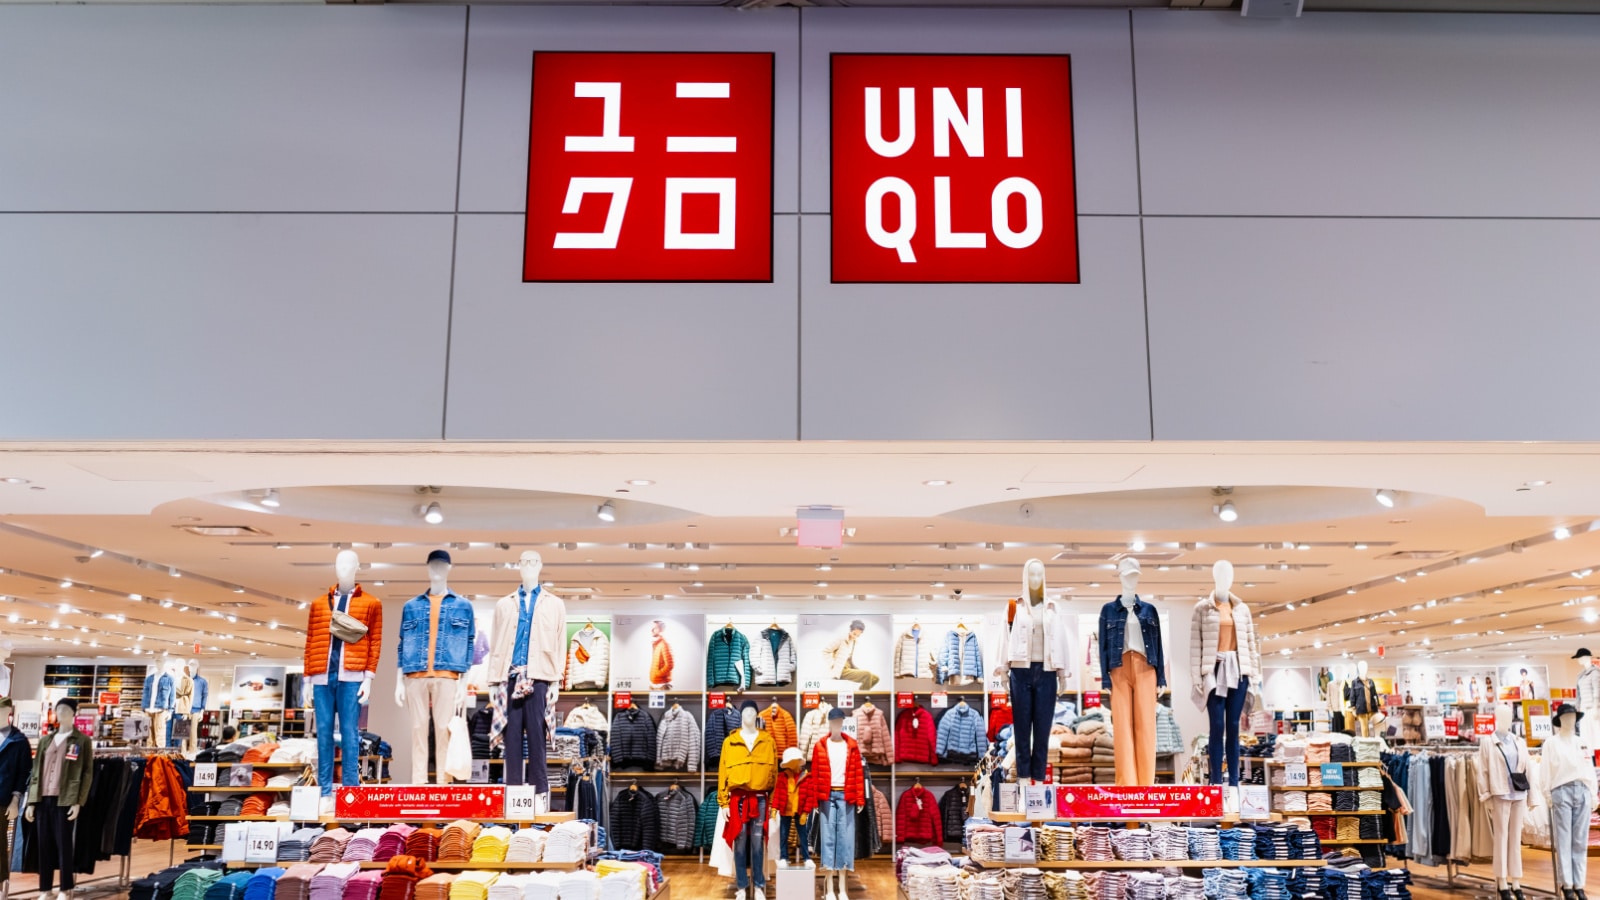 Jan 31, 2020 Milpitas / CA / USA - Uniqlo store in a South San Francisco Bay area mall; Uniqlo Co., Ltd is a Japanese casual wear designer, manufacturer and retailer